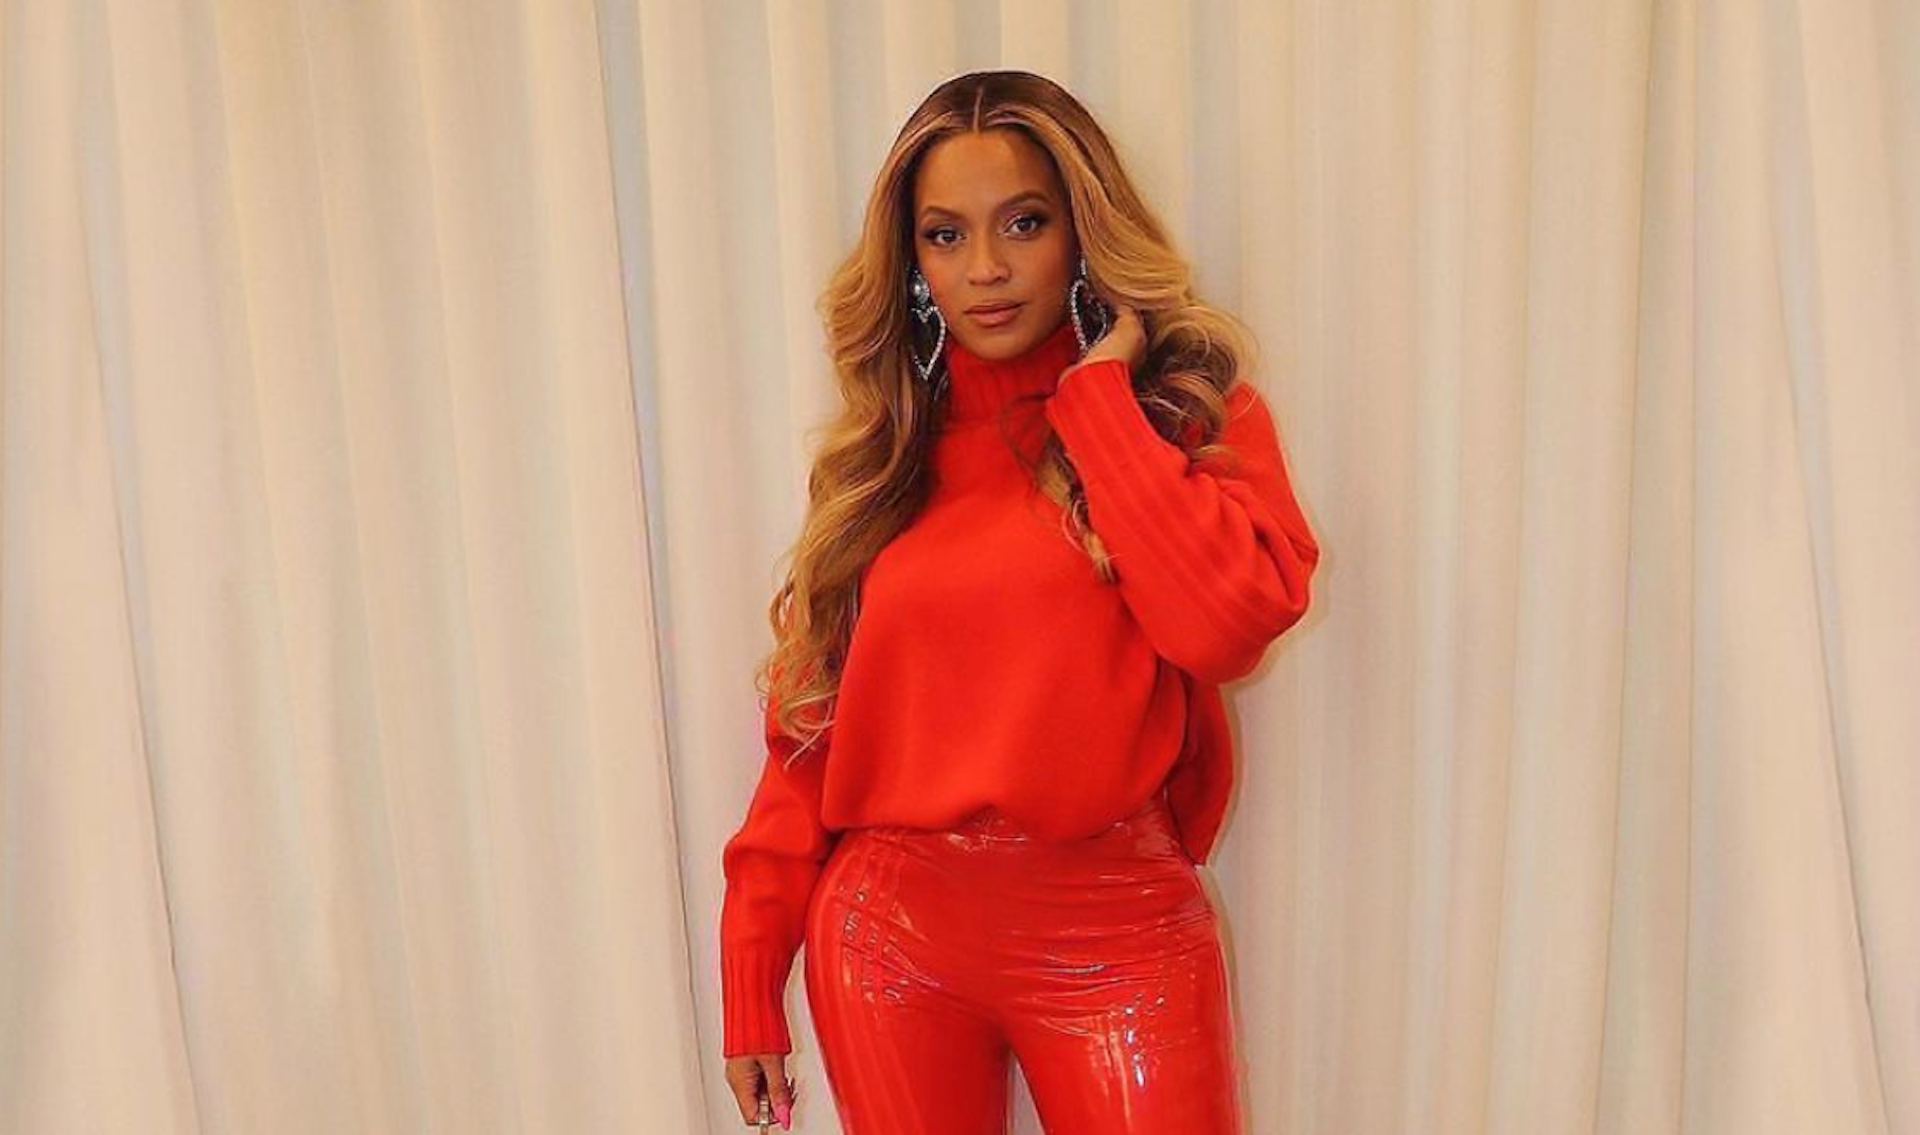 Beyoncé posted her first TikTok today, and it's a heartfelt 